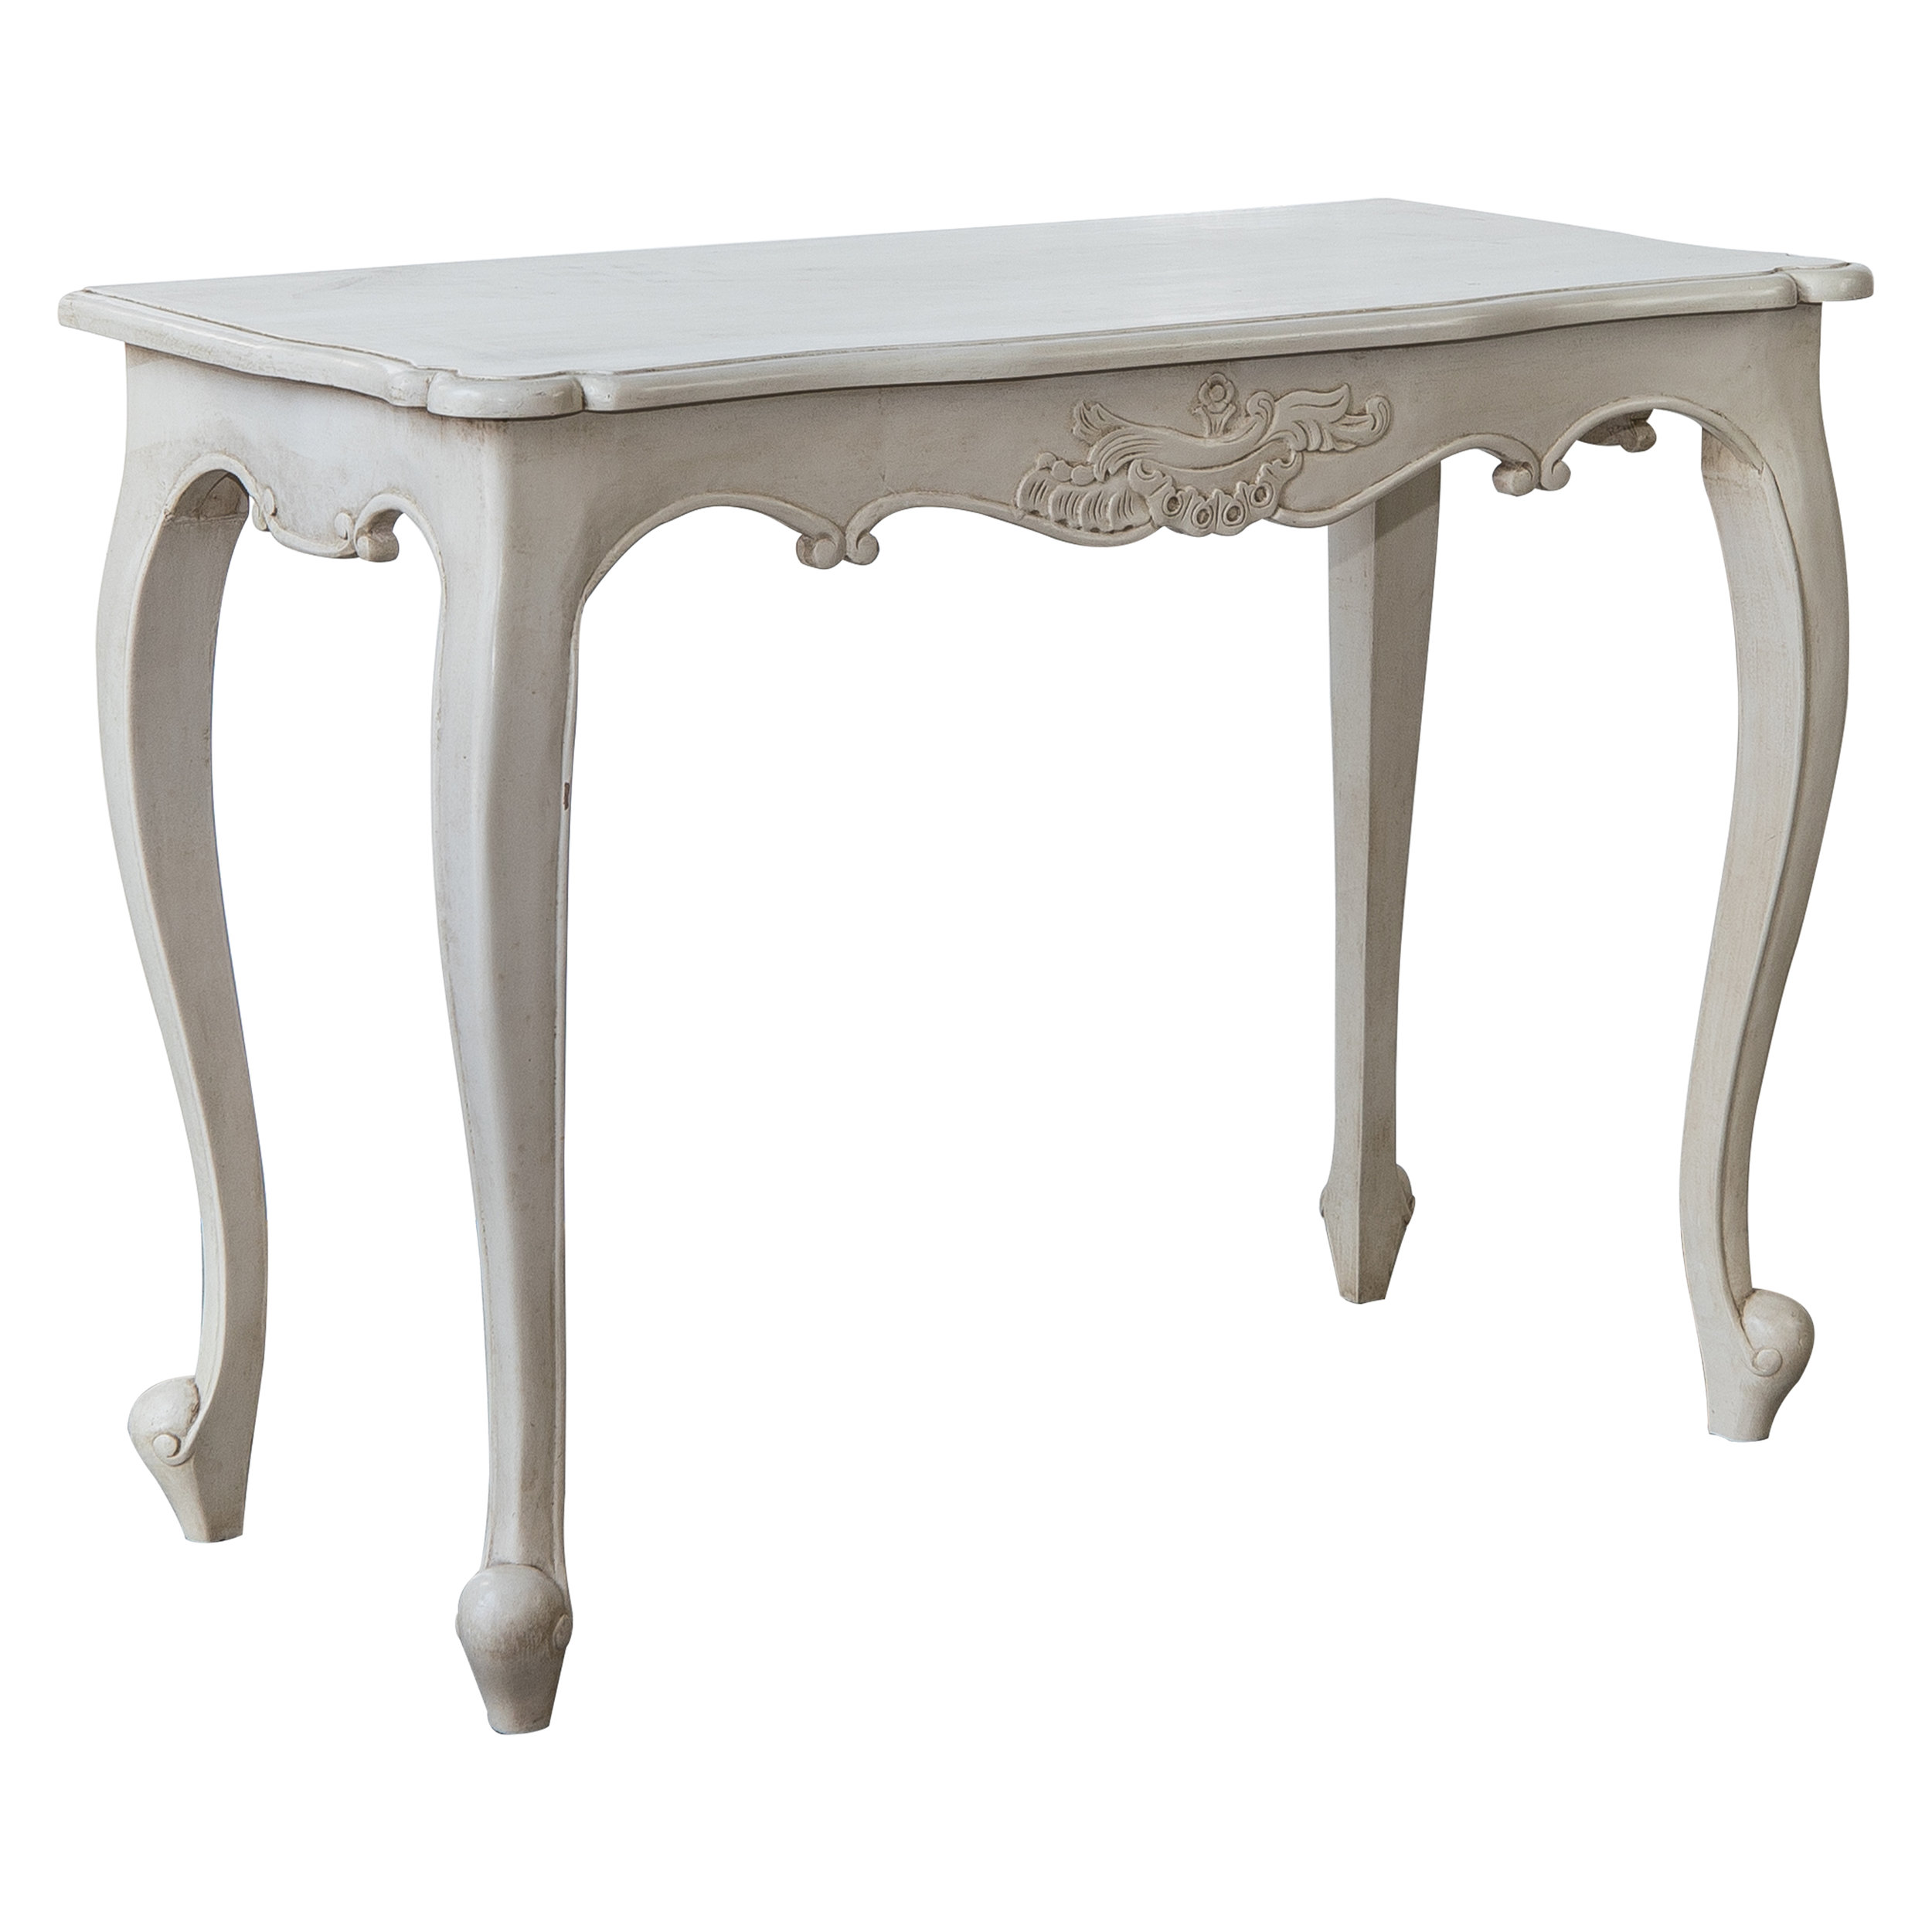 French Provincial Furniture Classic Hall Table In White The Find